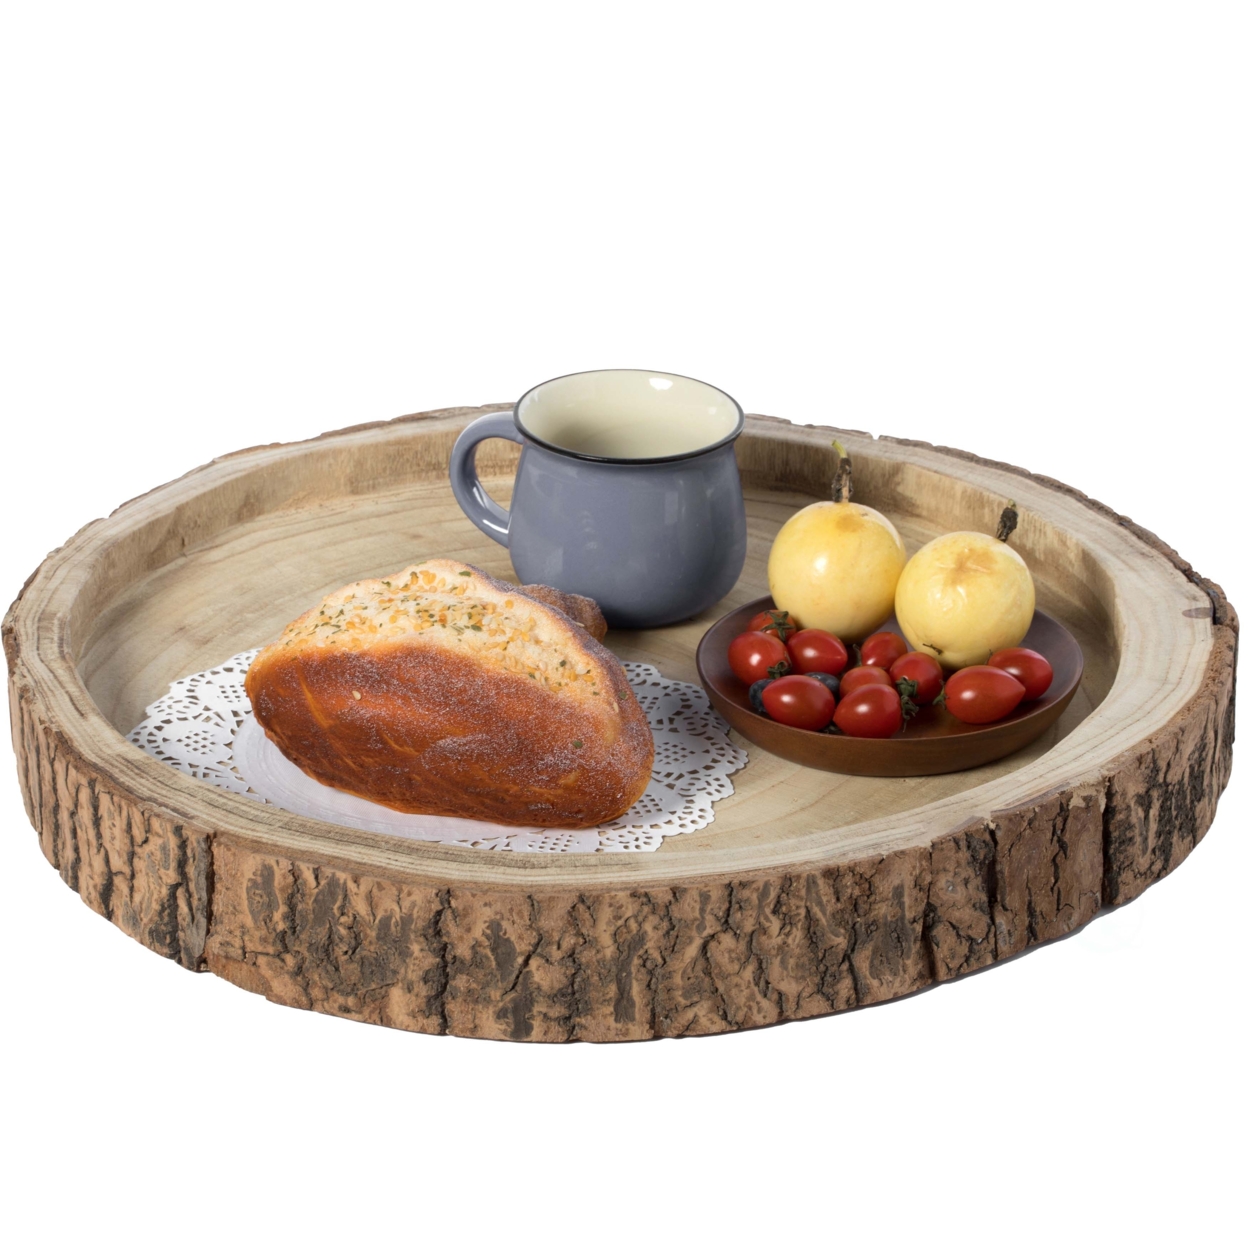 Wood Tree Bark Indented Display Tray Serving Plate Platter Charger - 18 Diameter